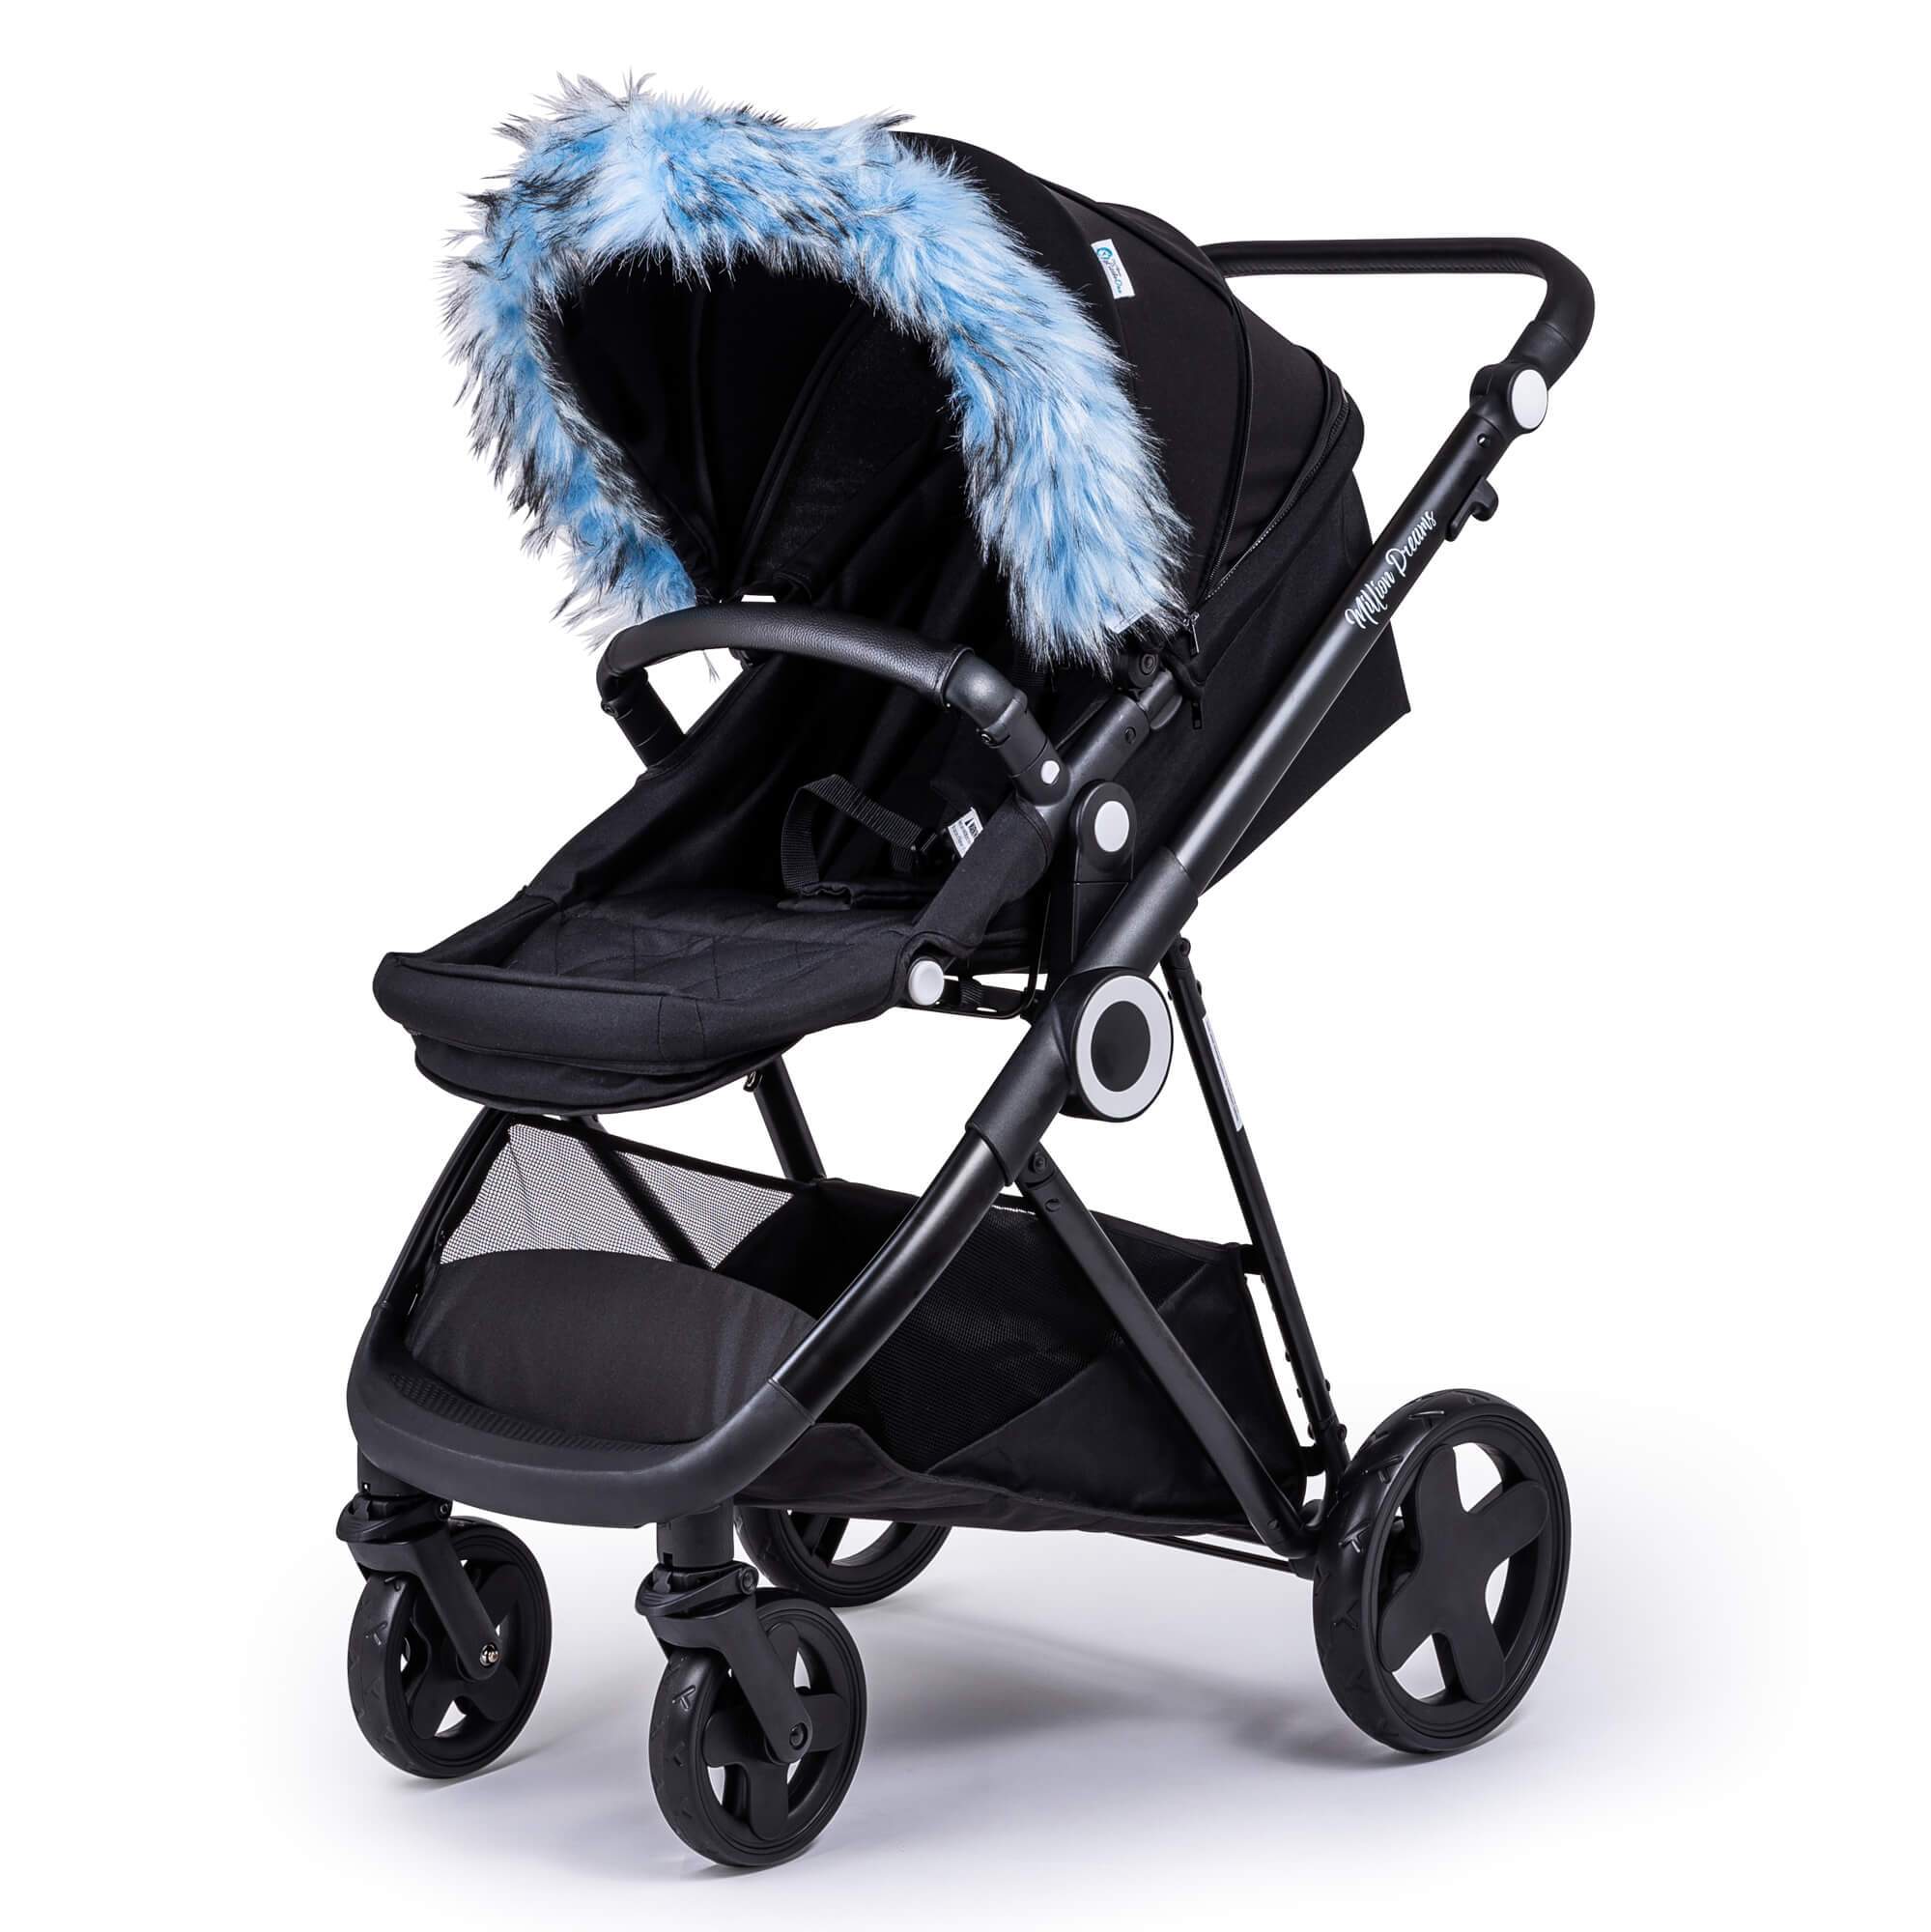 Pram Fur Hood Trim Attachment for Pushchair Compatible with Emmaljunga - Light Blue / Fits All Models | For Your Little One